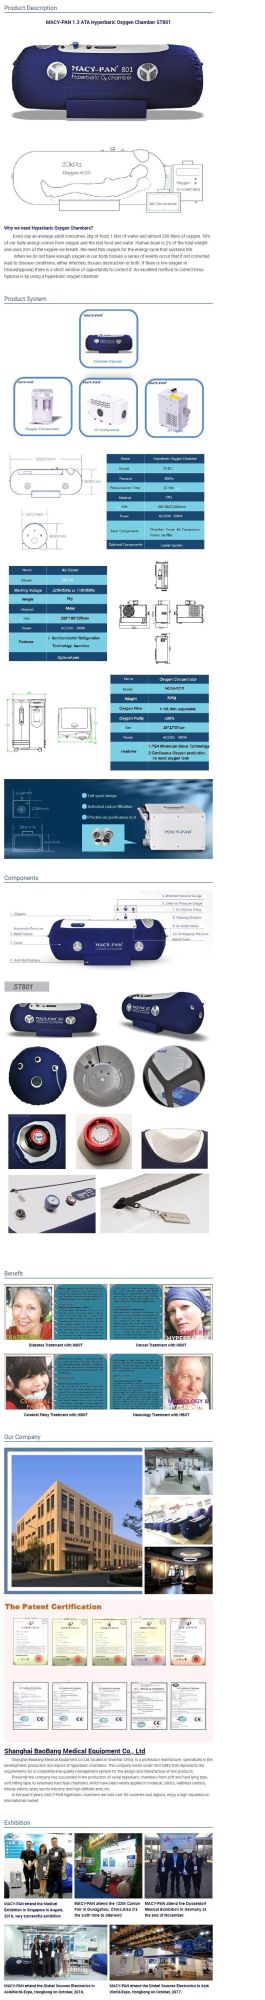 Macy-Pan Portable Hyperbaric Chambers for Oxygen Therapy